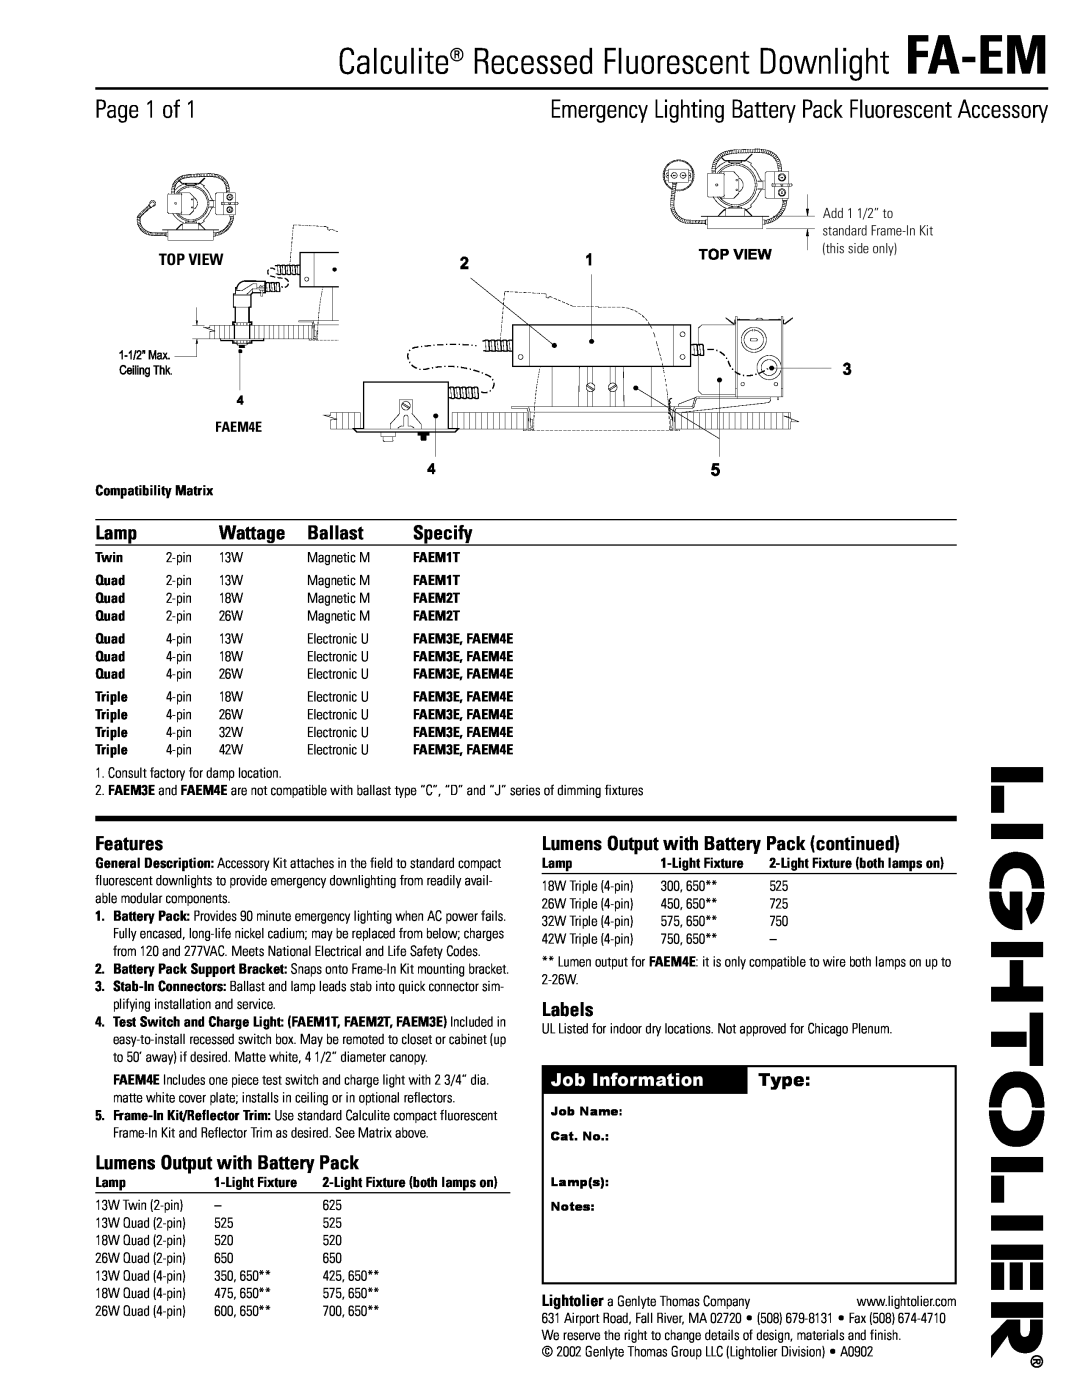 Lightolier manual Calculite Recessed Fluorescent Downlight FA-EM, Page 1 of, Lamp, Wattage, Ballast, Specify, Features 